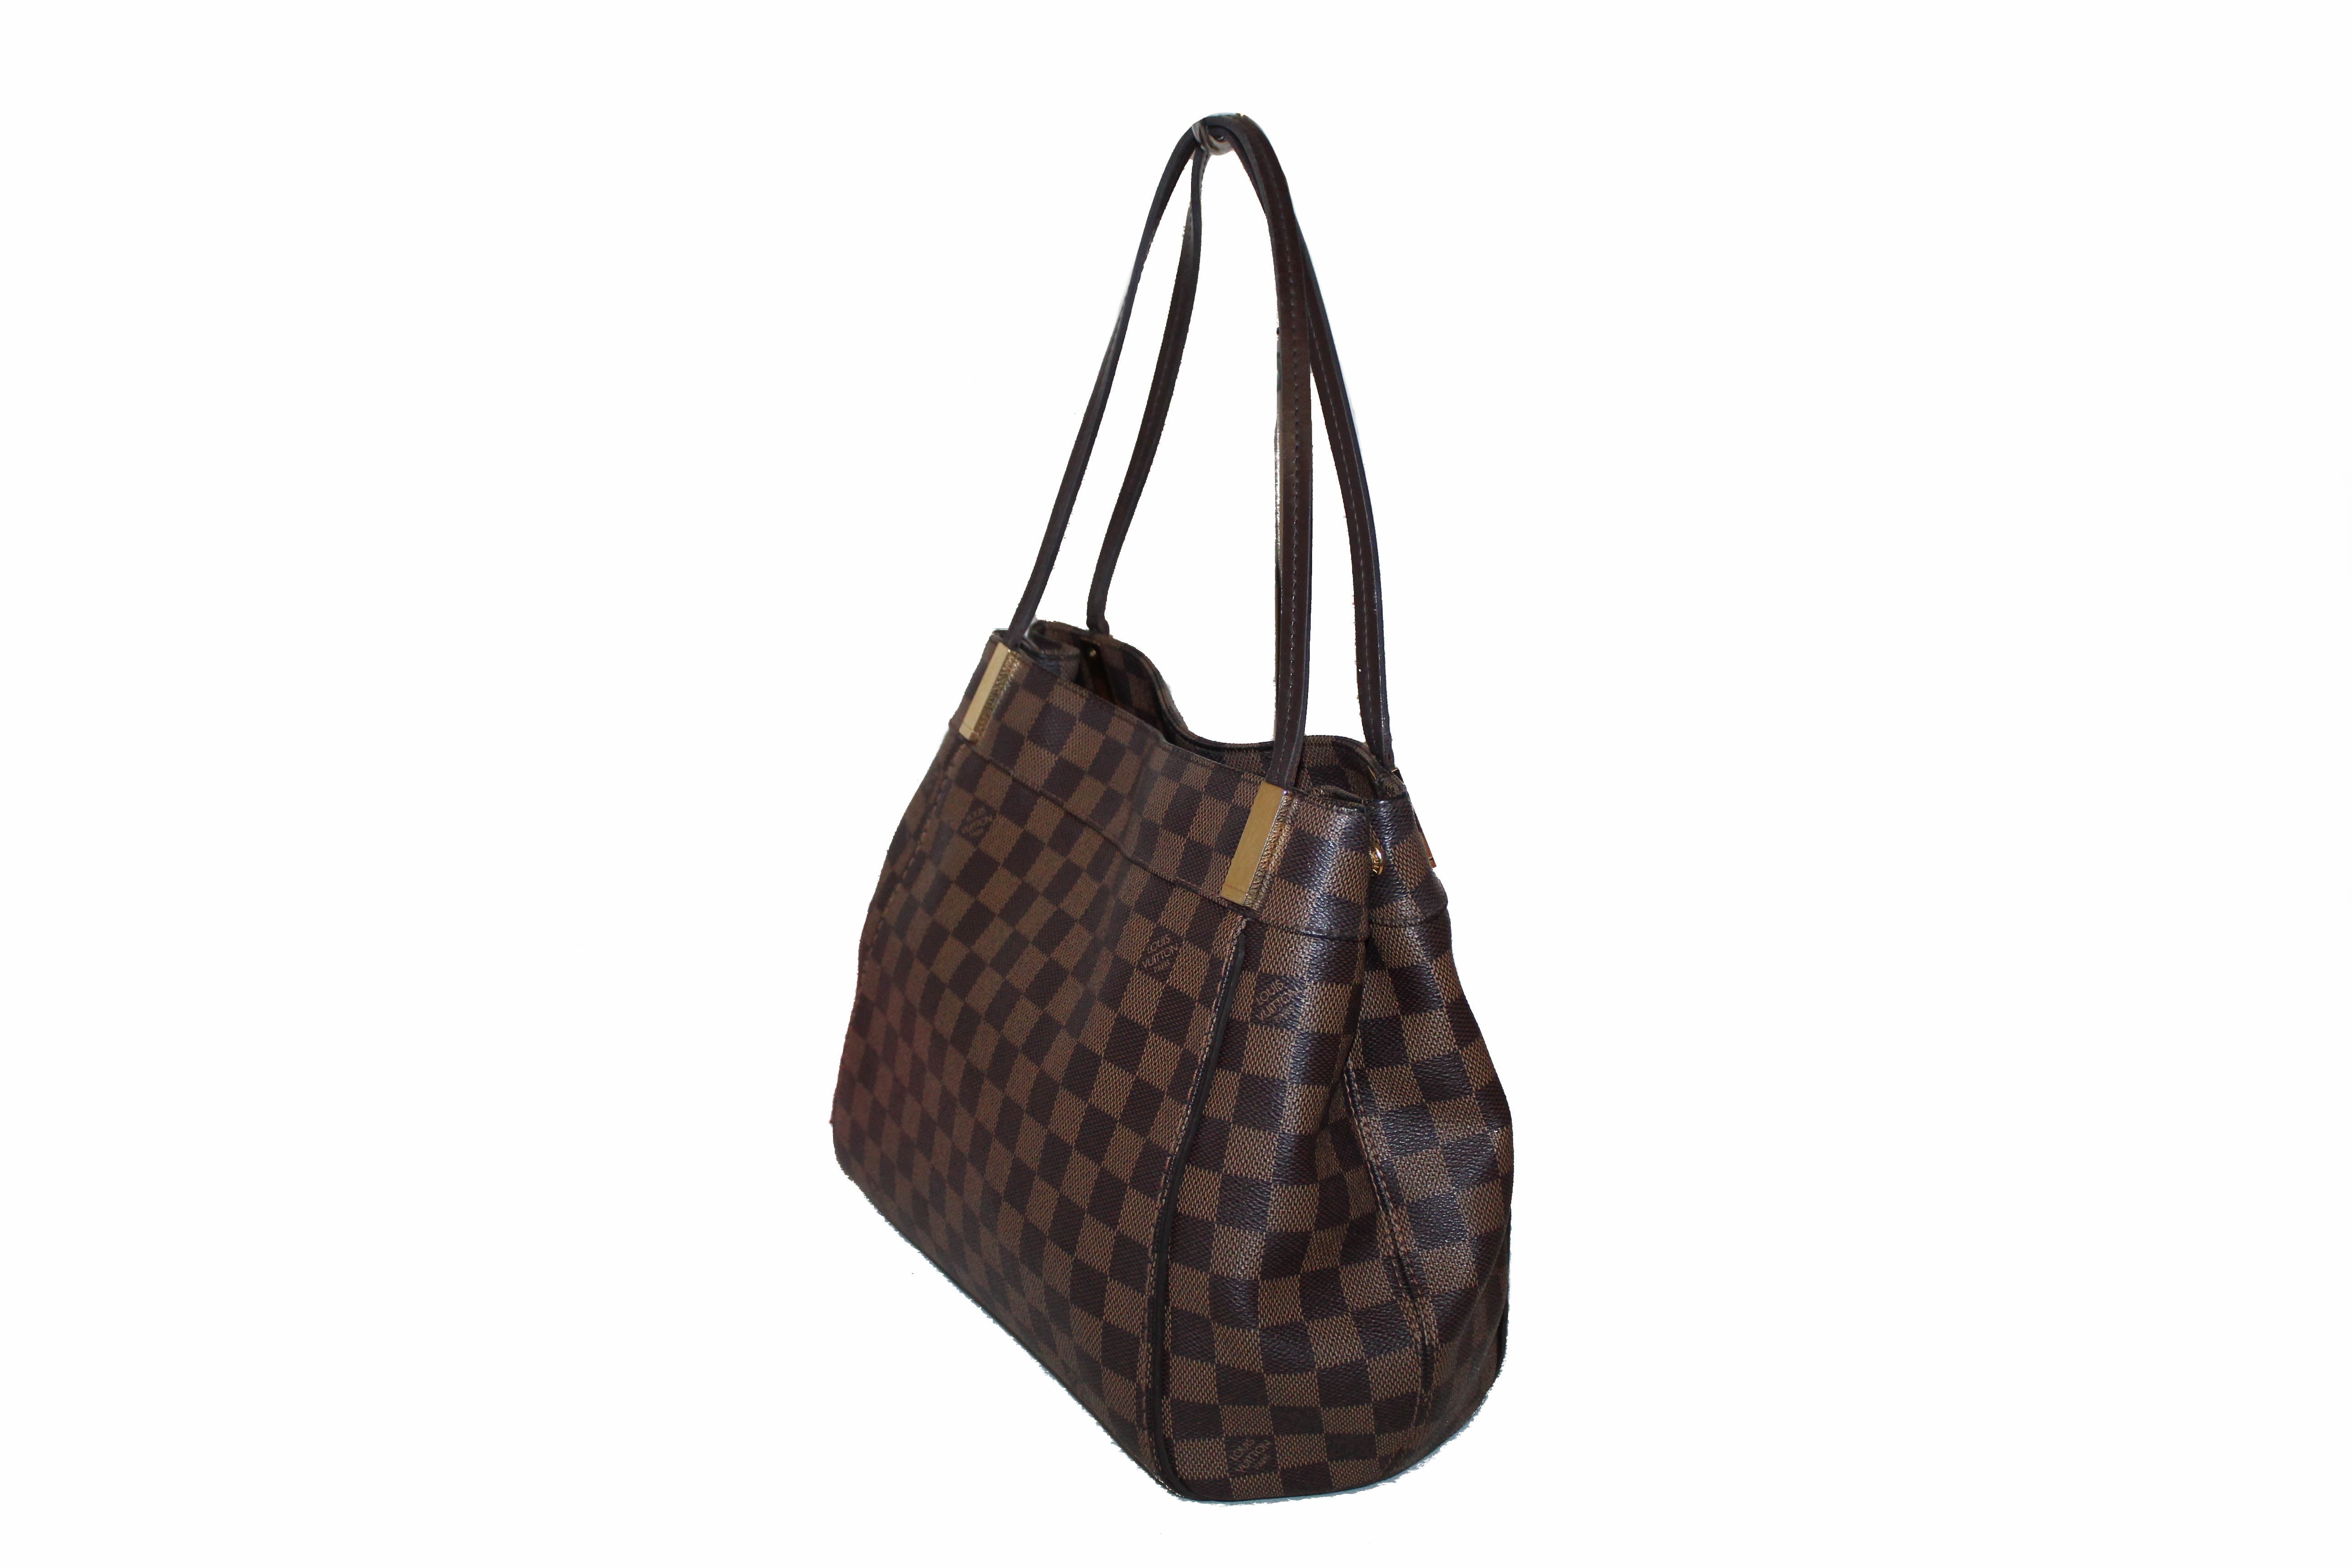 Louis Vuitton 2013 Pre-owned Marylebone PM Tote Bag - Brown